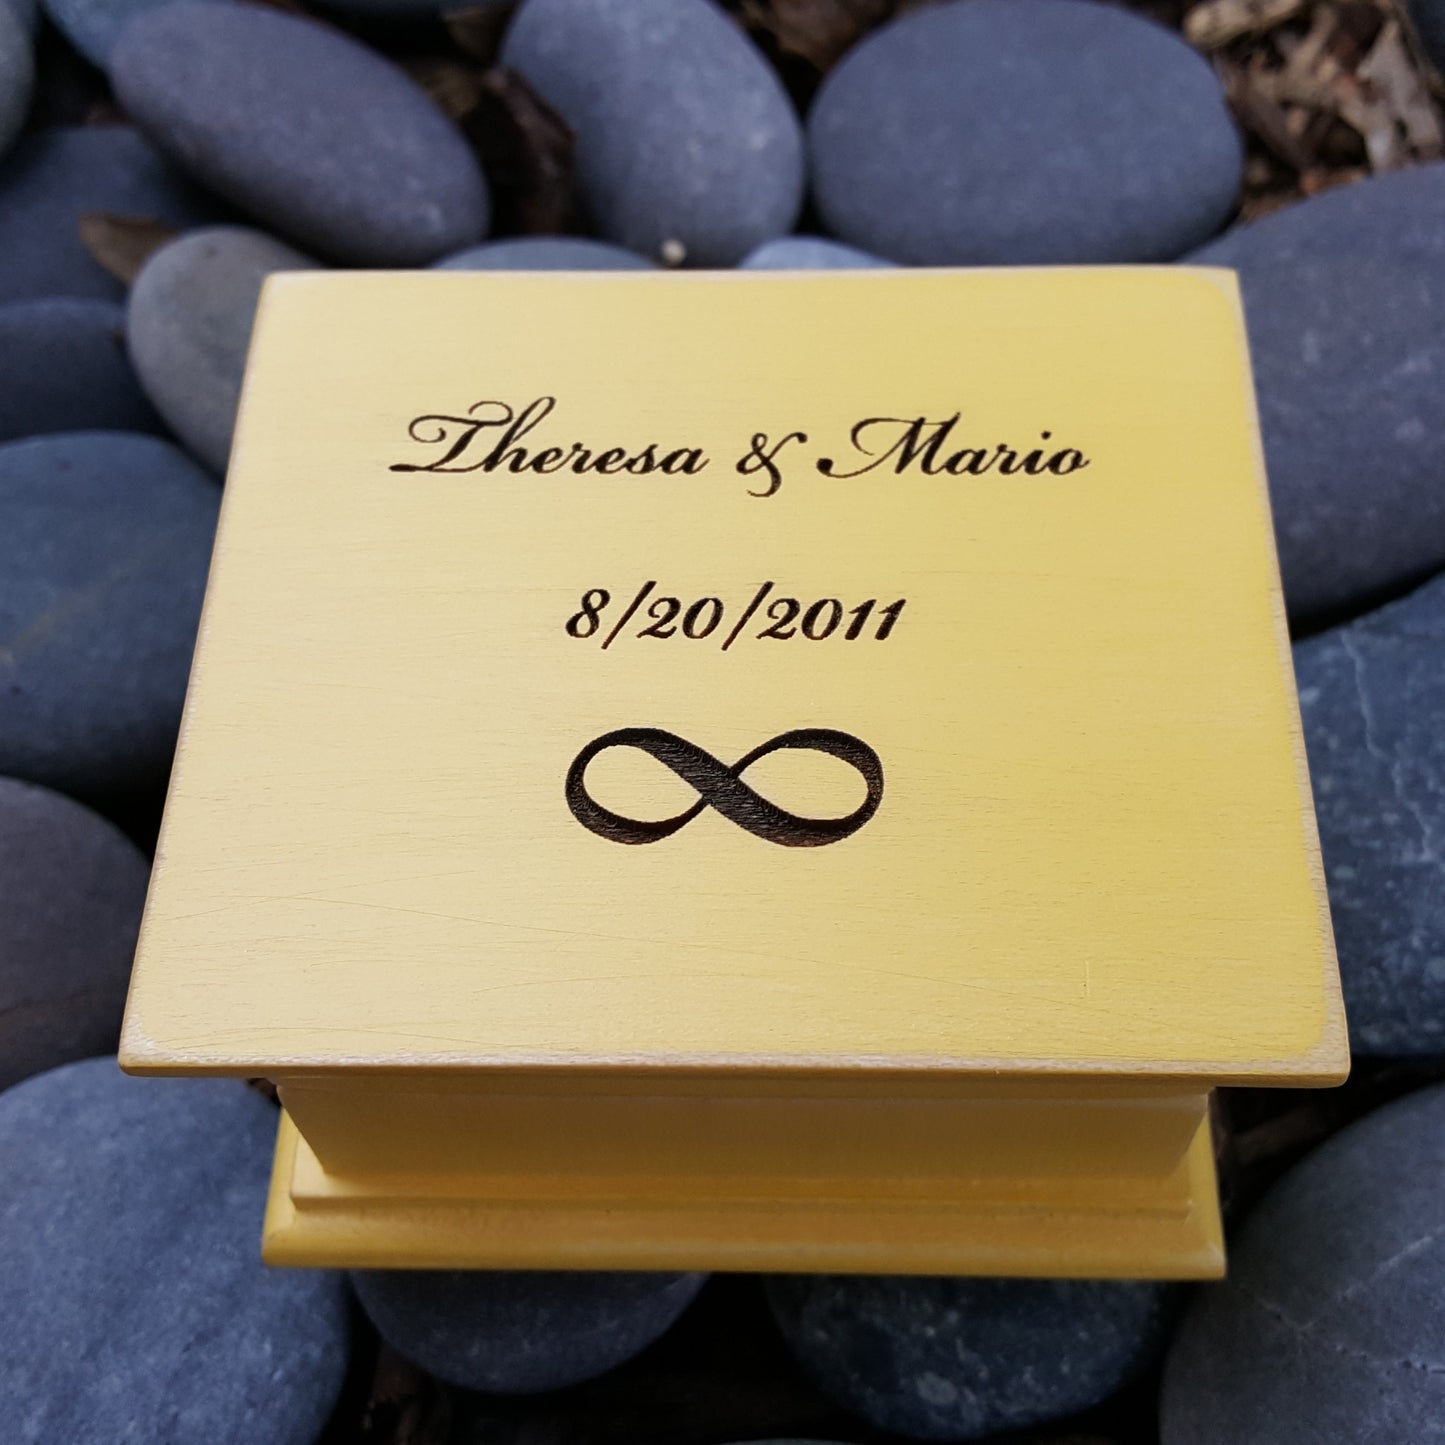 Music box with your names and date engraved on top, perfect anniversary gift